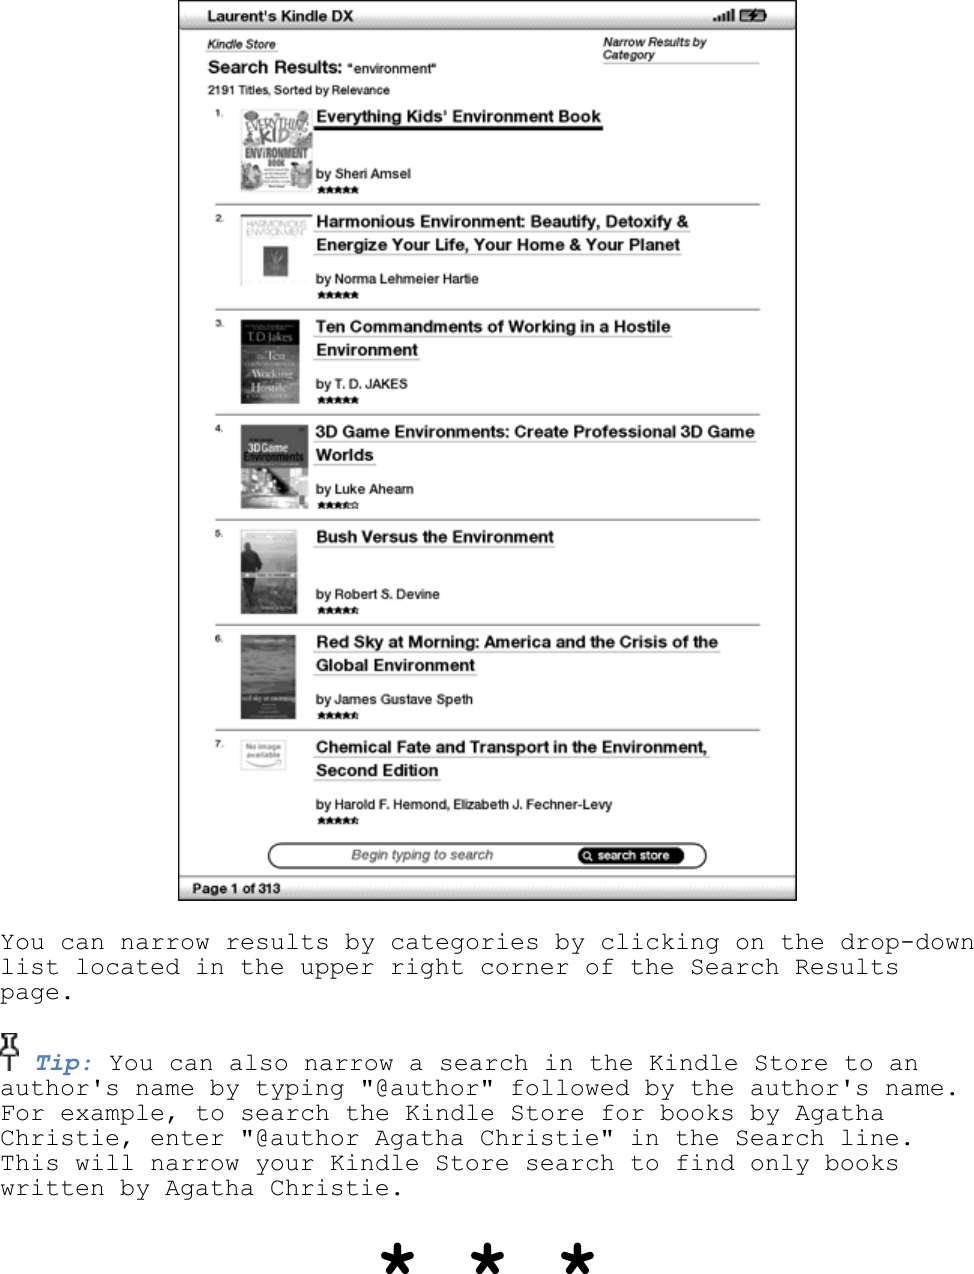    You can narrow results by categories by clicking on the drop-down list located in the upper right corner of the Search Results page.  Tip: You can also narrow a search in the Kindle Store to an author&apos;s name by typing &quot;@author&quot; followed by the author&apos;s name. For example, to search the Kindle Store for books by Agatha Christie, enter &quot;@author Agatha Christie&quot; in the Search line. This will narrow your Kindle Store search to find only books written by Agatha Christie. * * * 